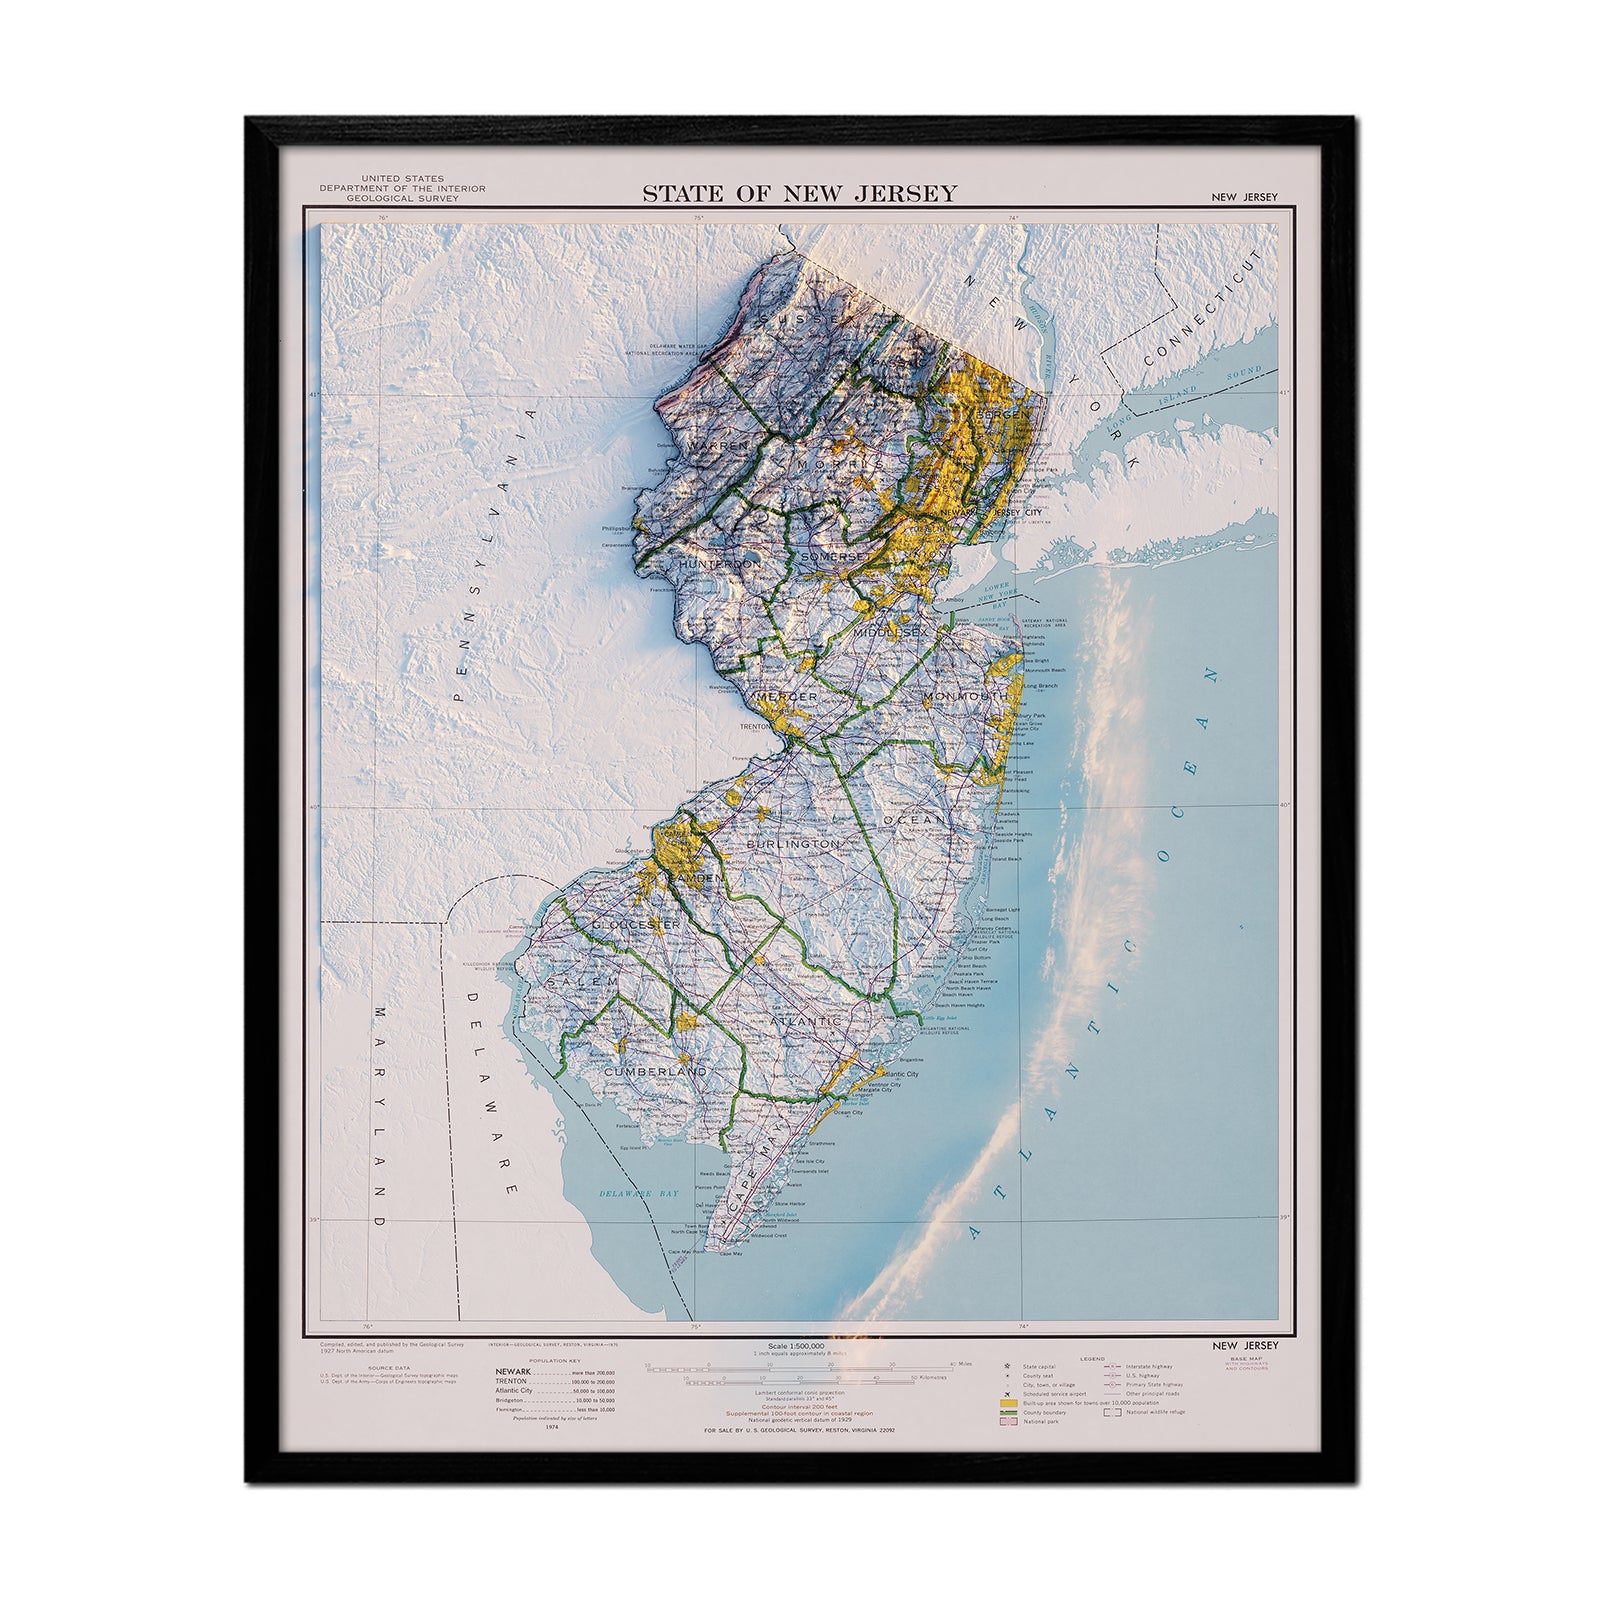 Vintage New Jersey Relief Map - 1974